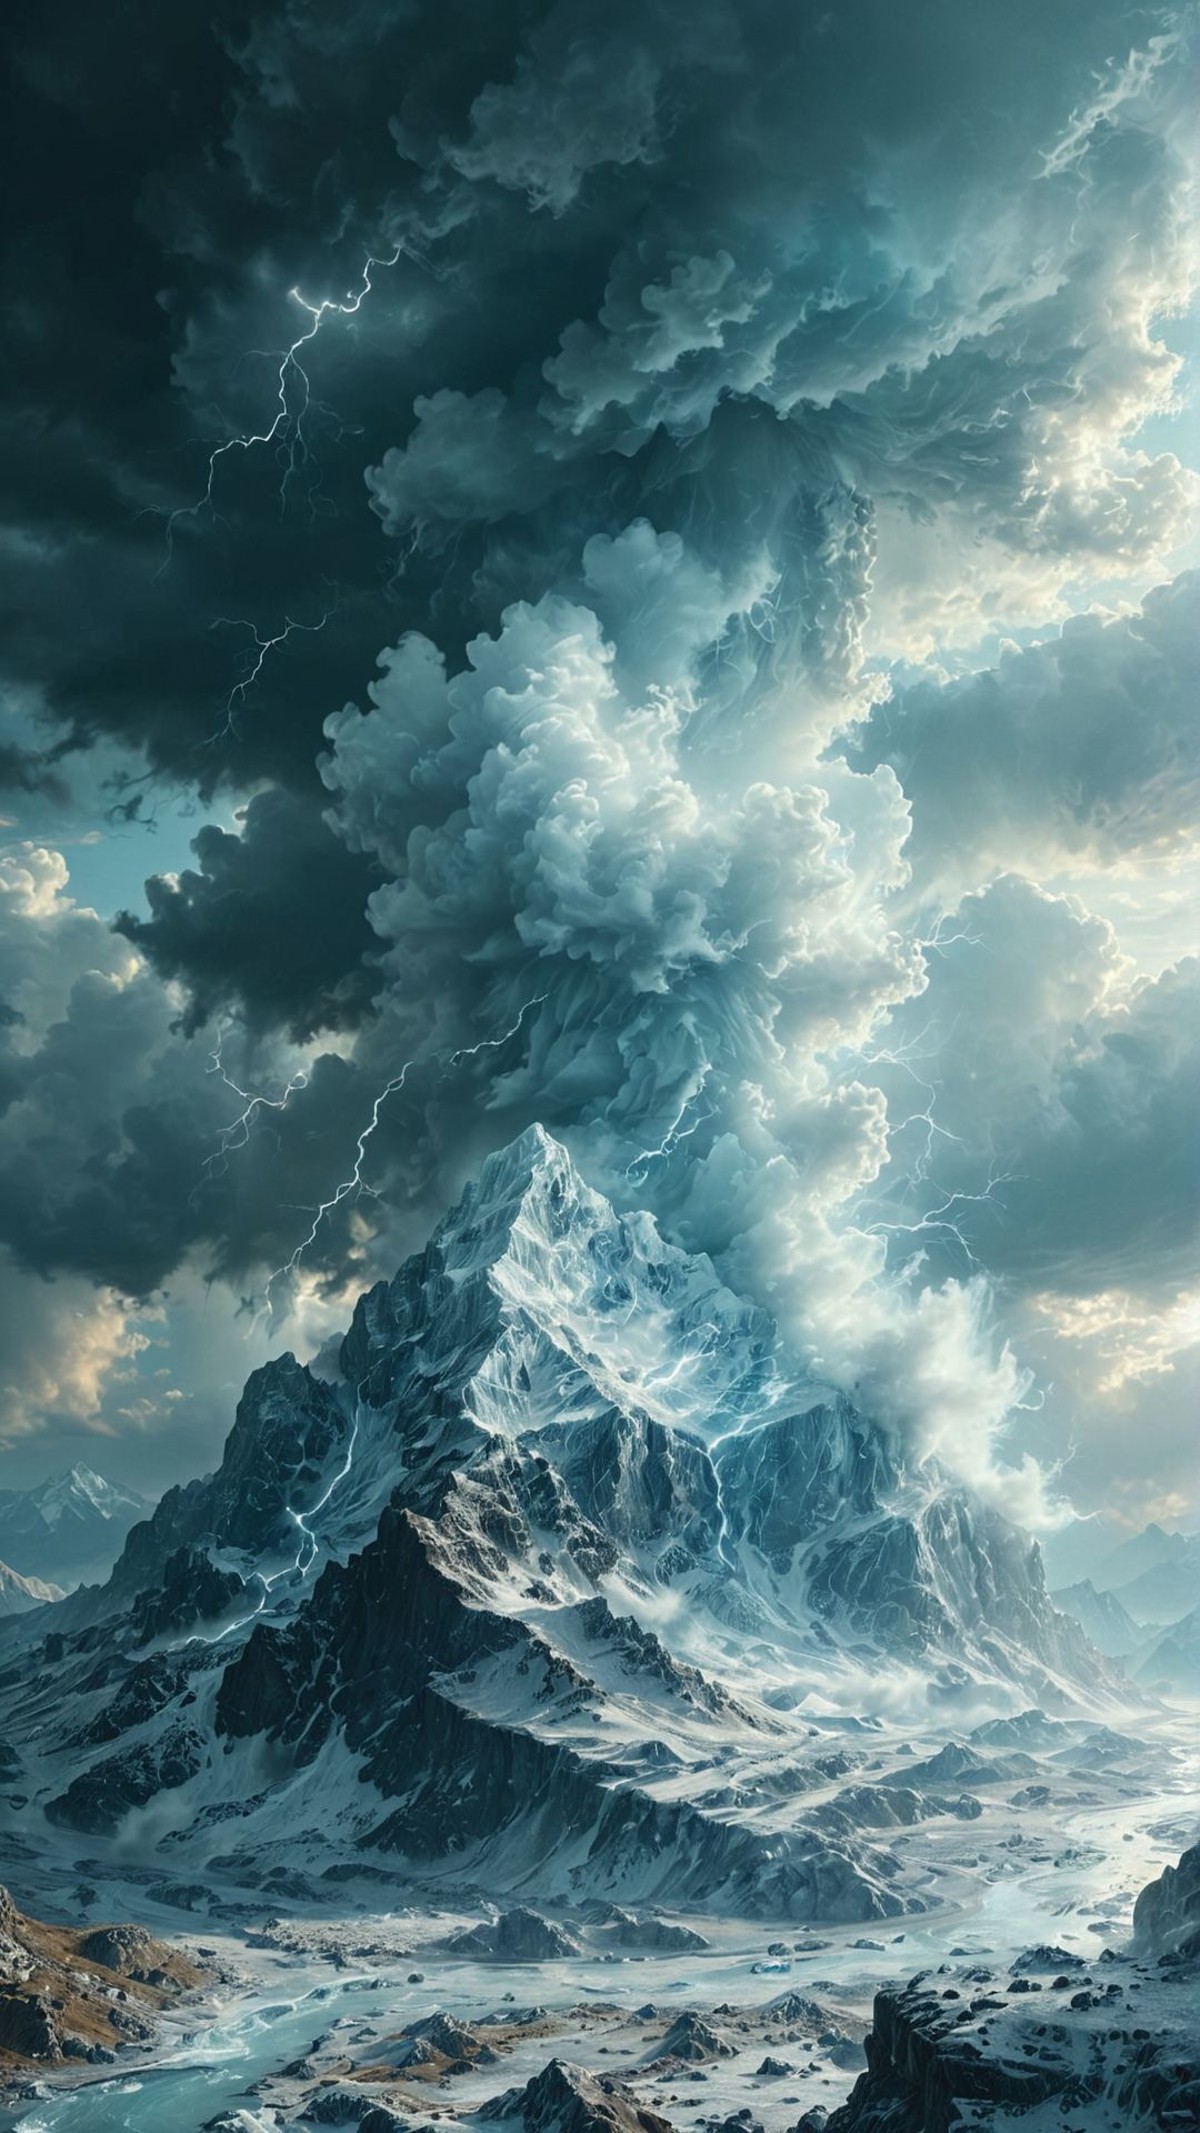 hyper realistic, a colossal figure made of swirling storm clouds, standing on the edge of a mountain range, lightning crac...